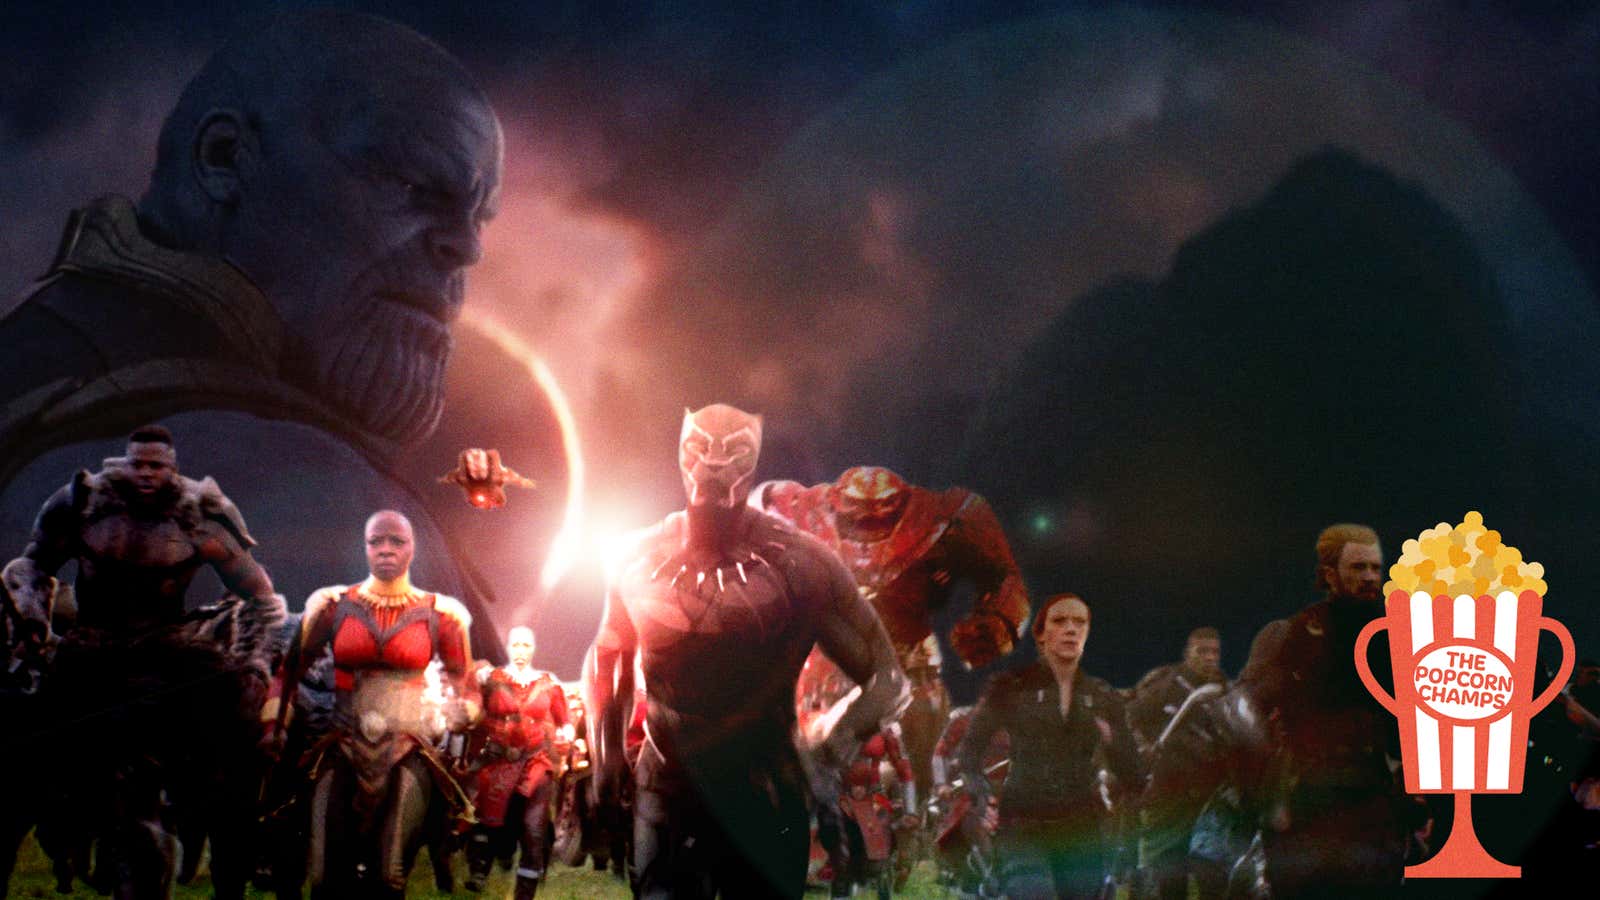 Avengers 4: Endgame' Concept Trailer Has Arrived - And It's Epic